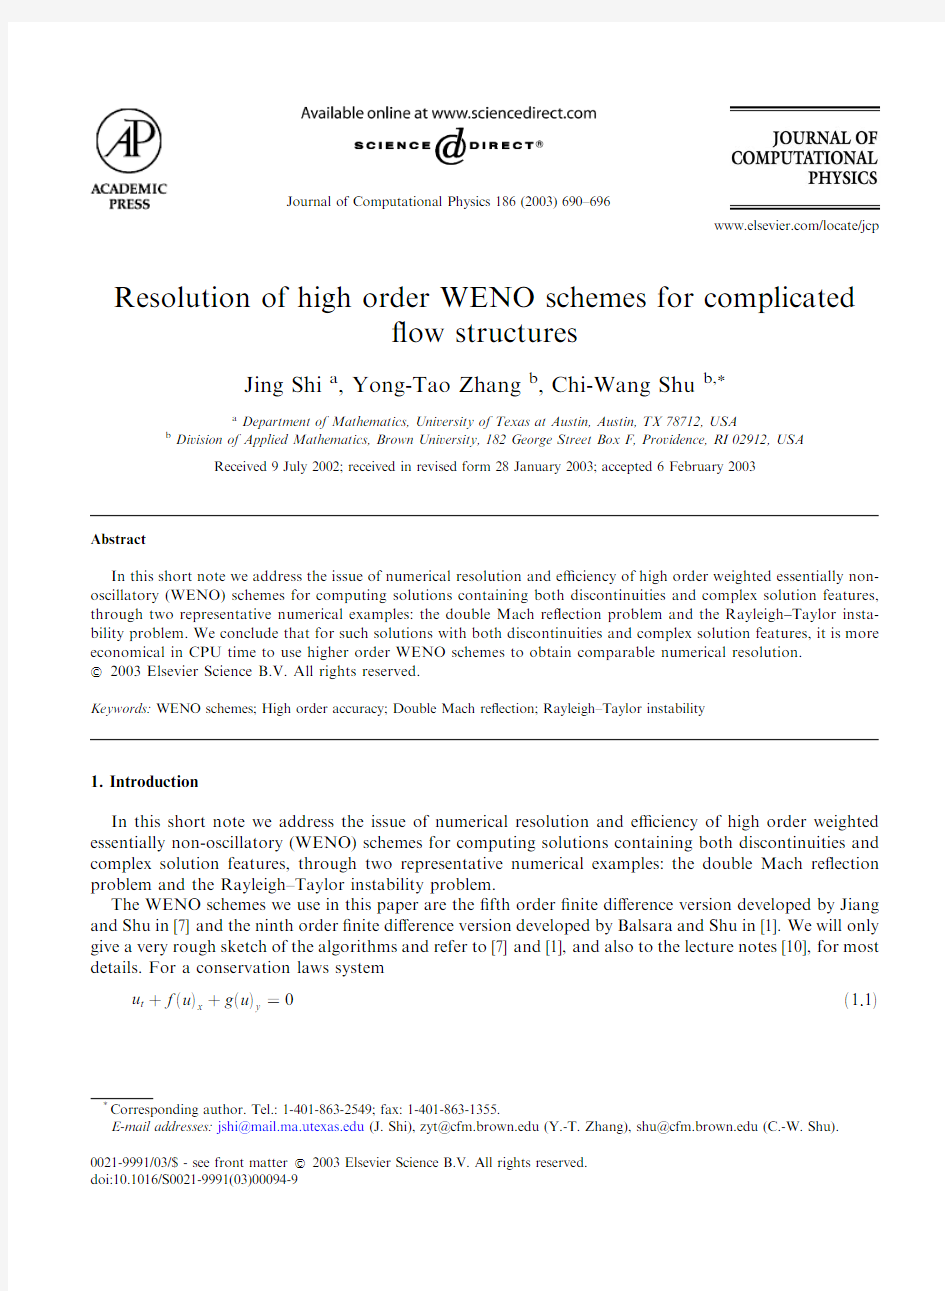 Resolution of high order WENO schemes for complicated flow structures